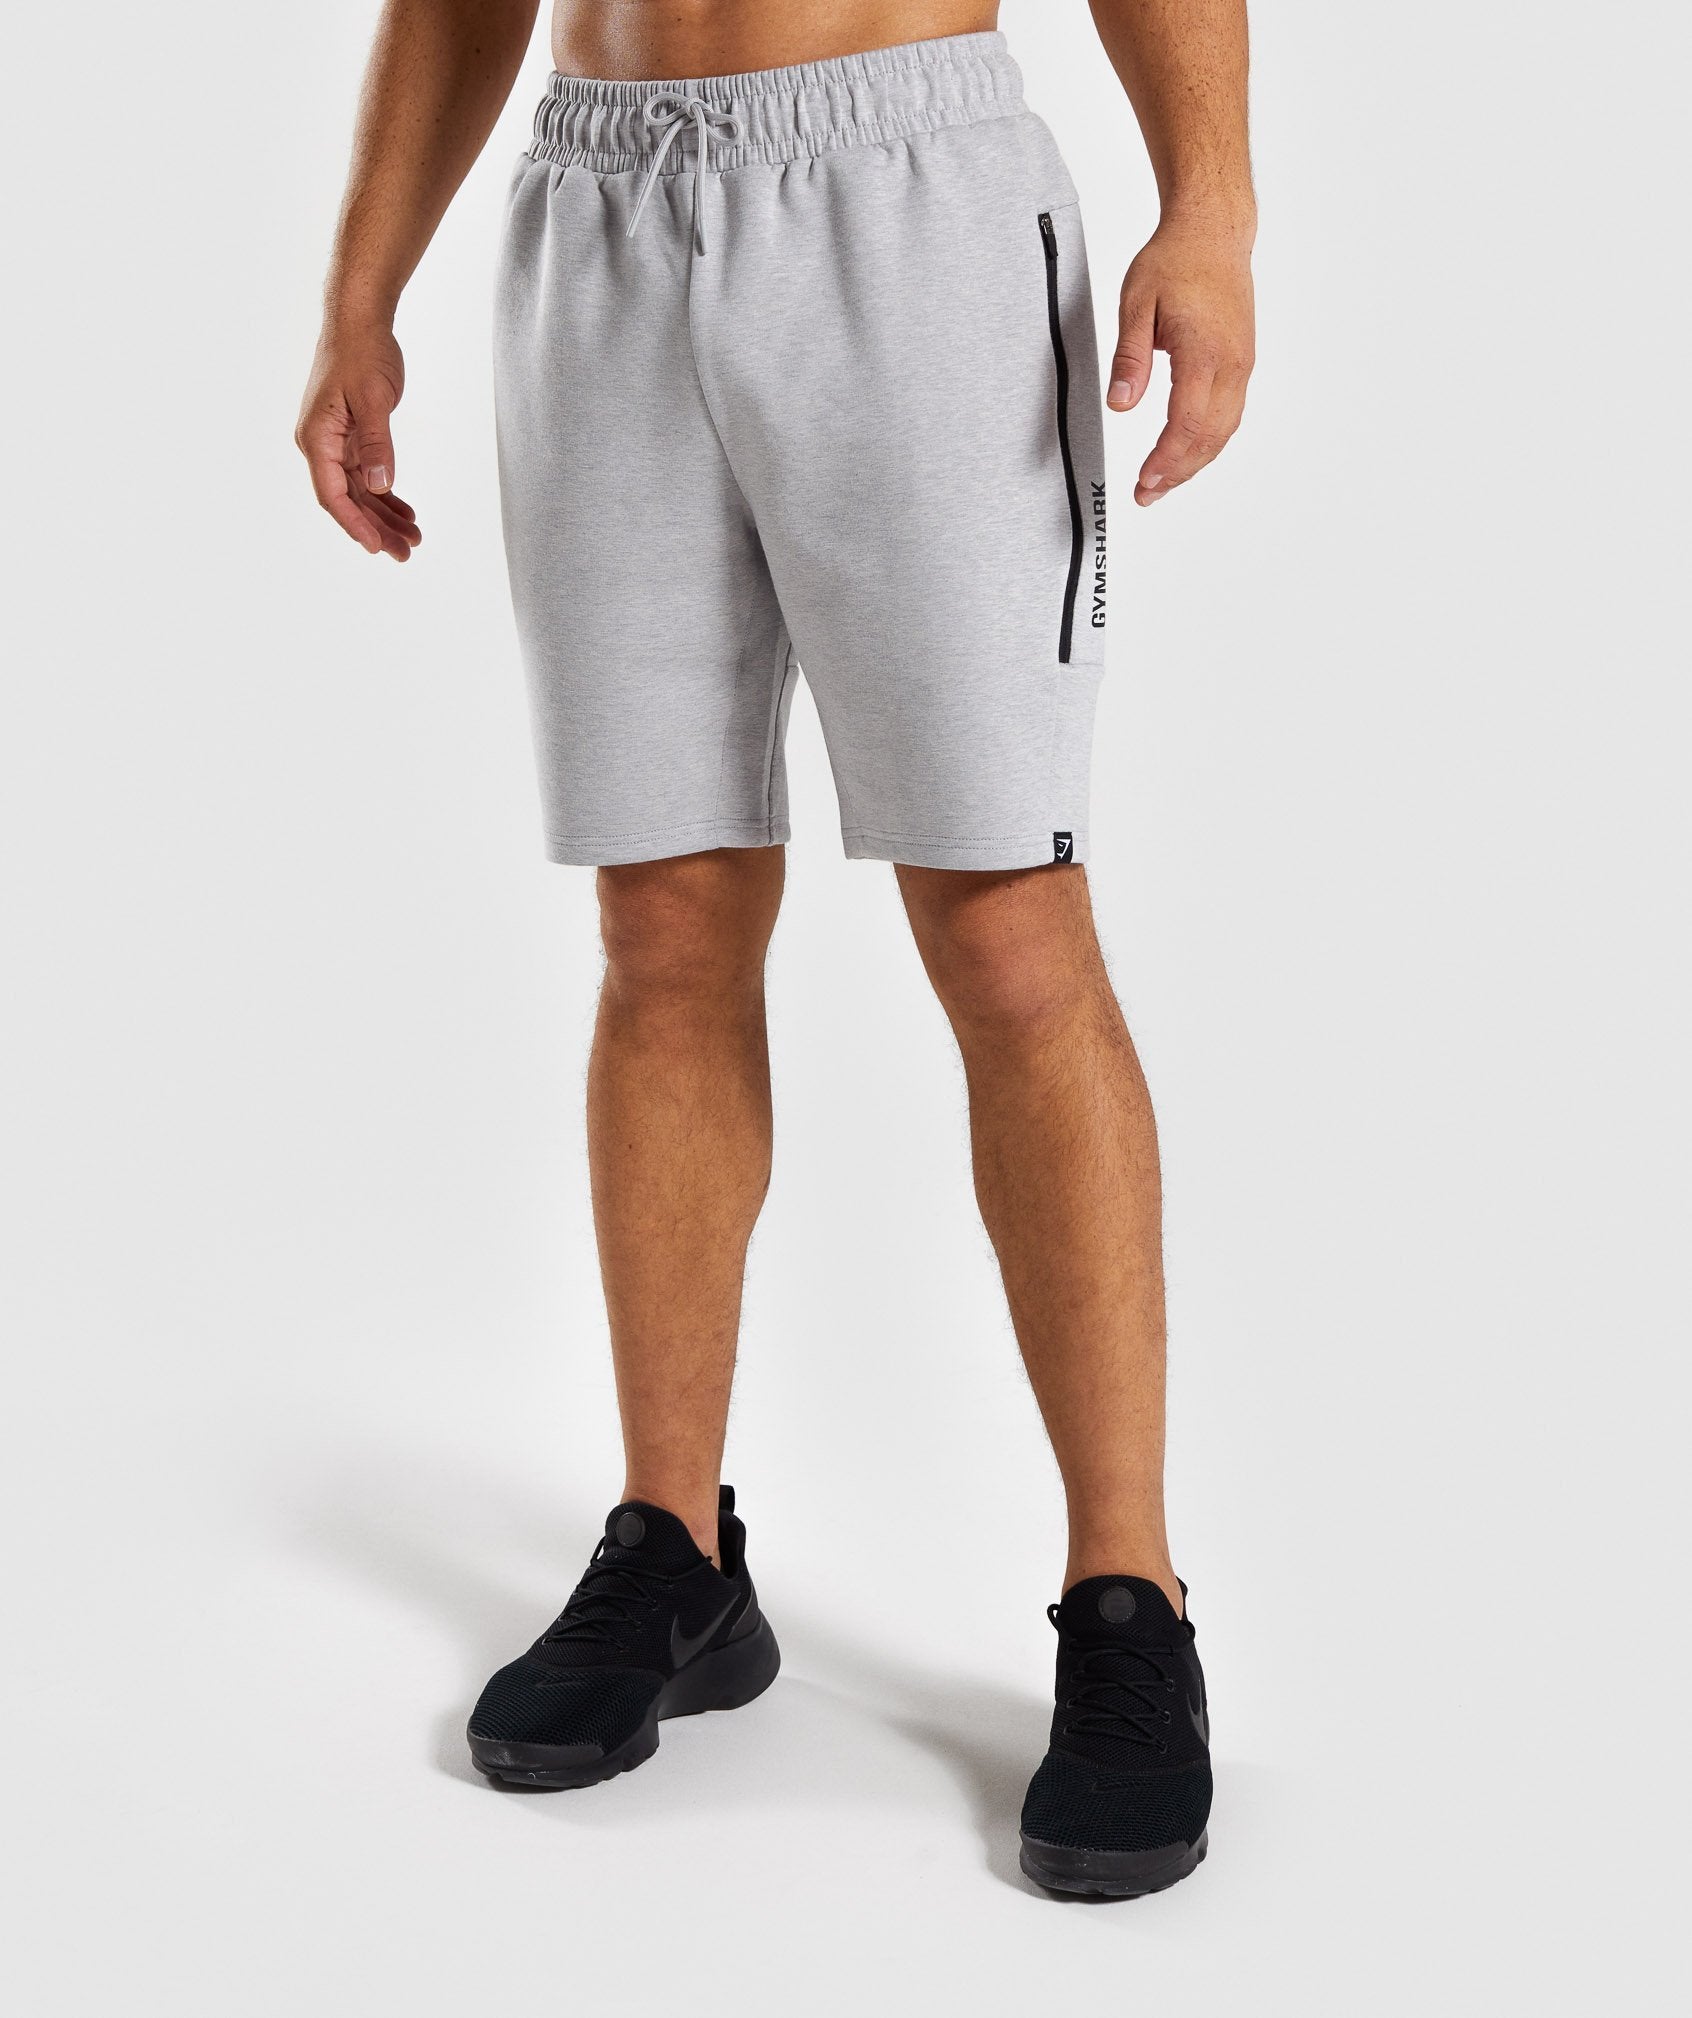 Ultra Shorts in Light Grey Marl - view 1